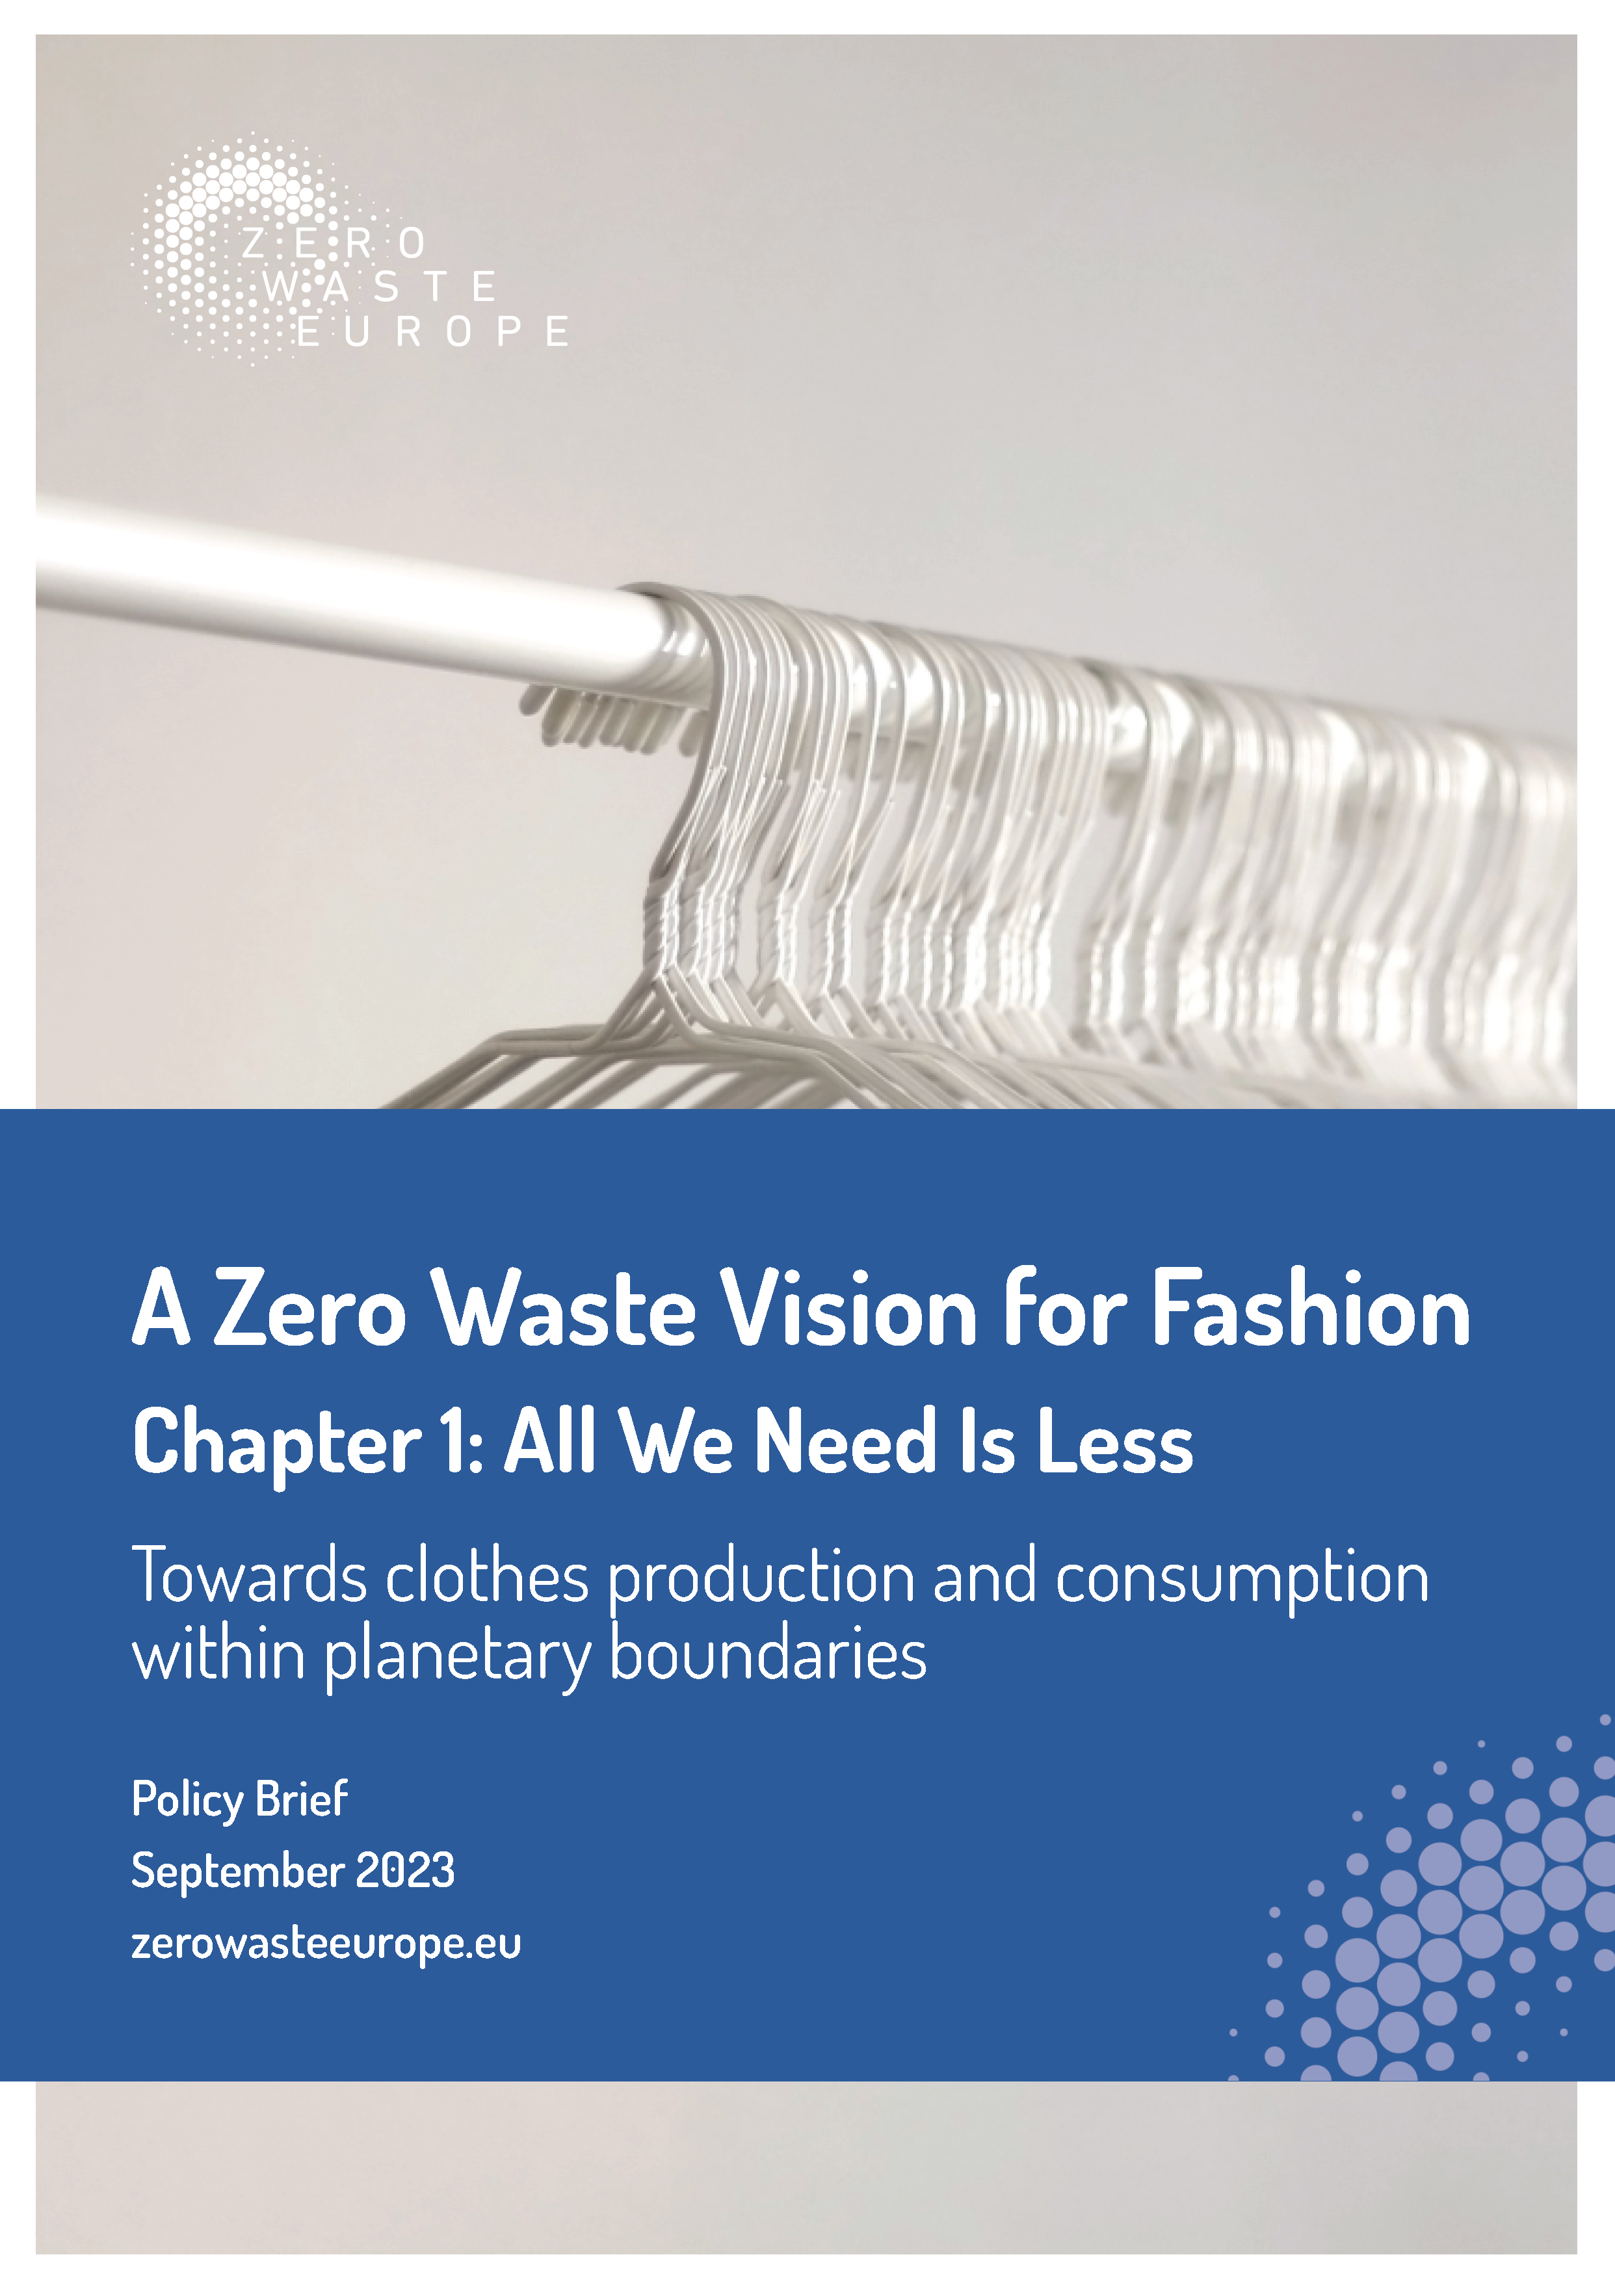 A Zero Waste Vision for Fashion – Chapter 1: All We Need Is Less